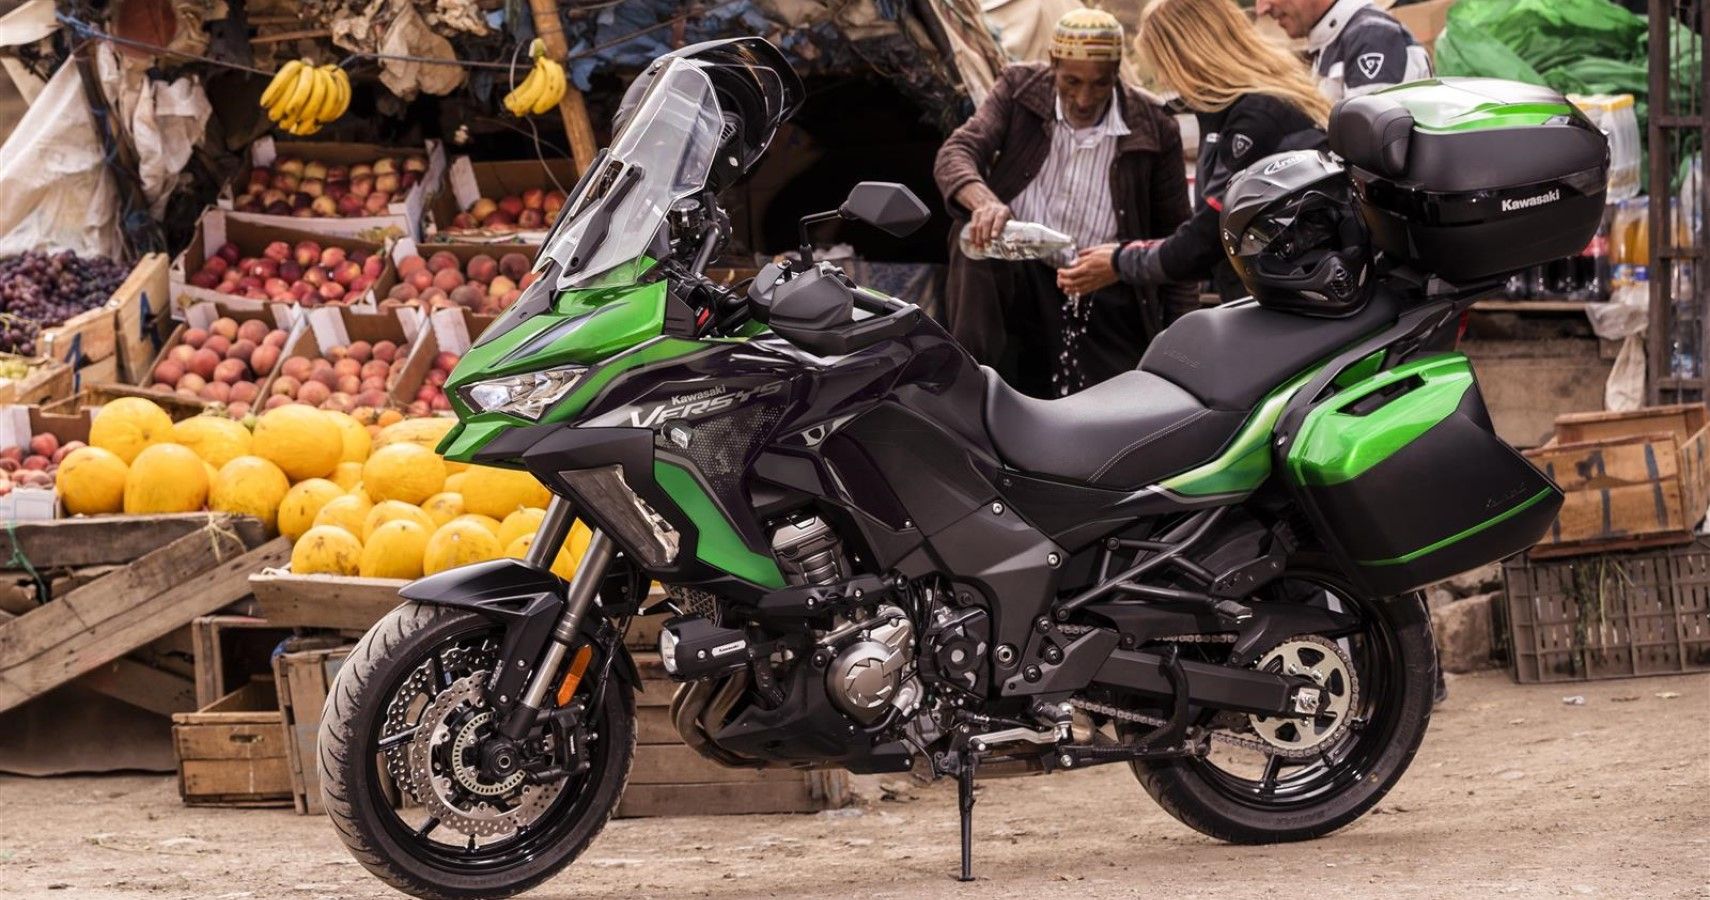 2022 Kawasaki Versys 1000 is made for the long haul